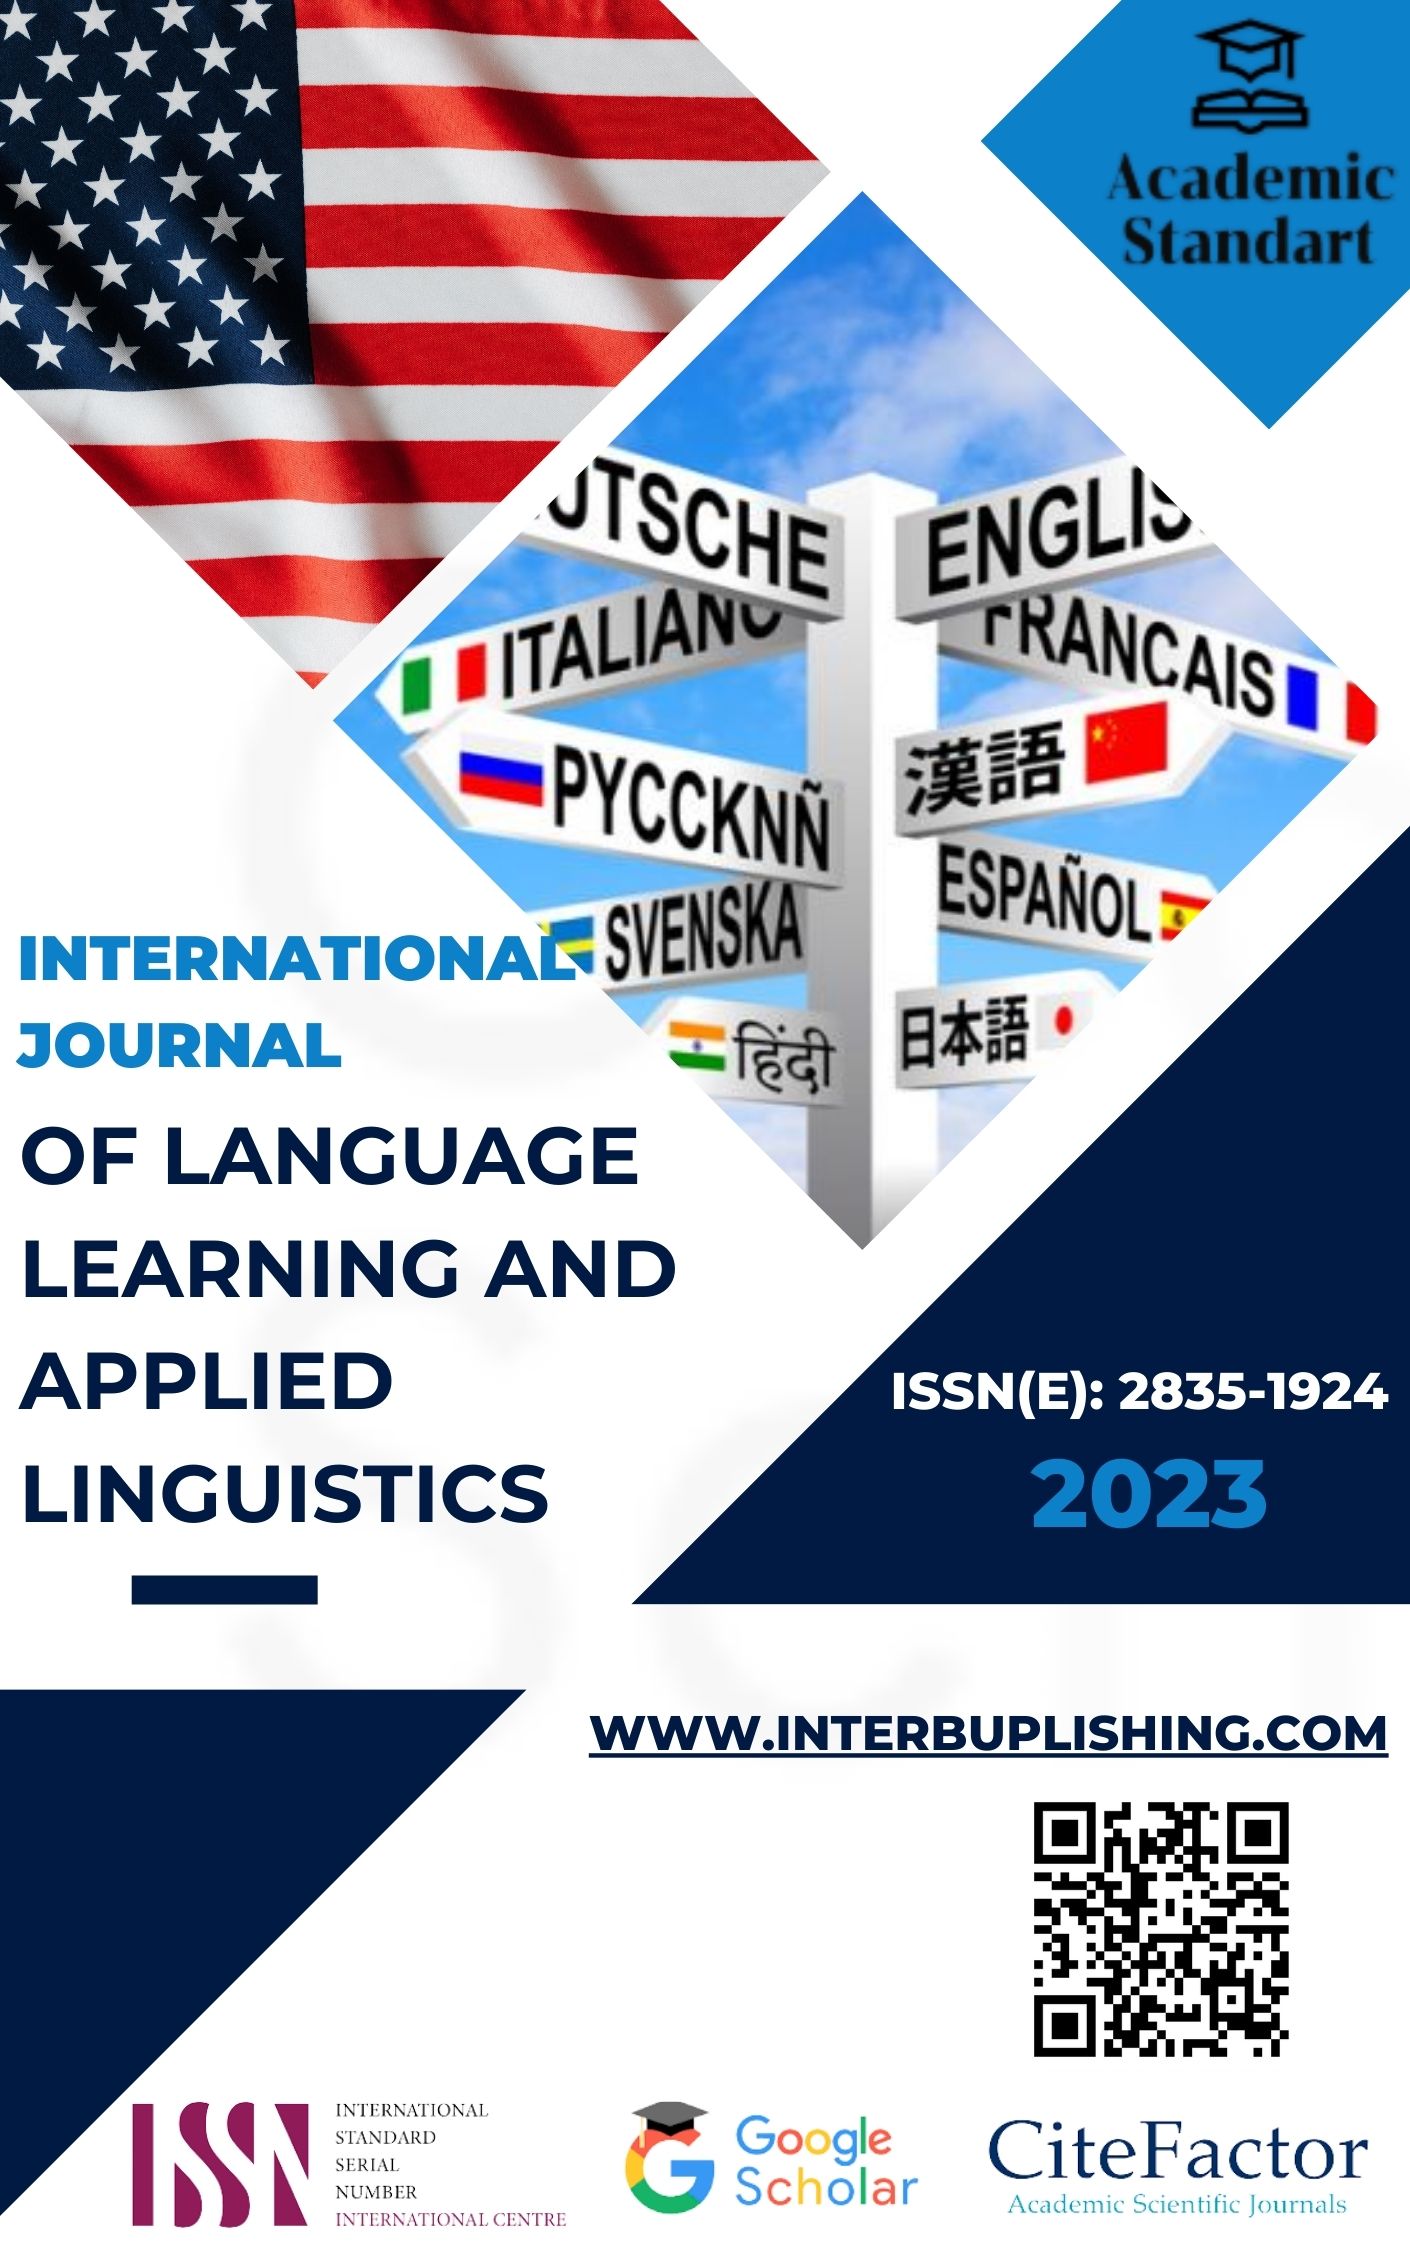 INTERNATIONAL JOURNAL OF LANGUAGE LEARNING AND APPLIED LINGUISTICS